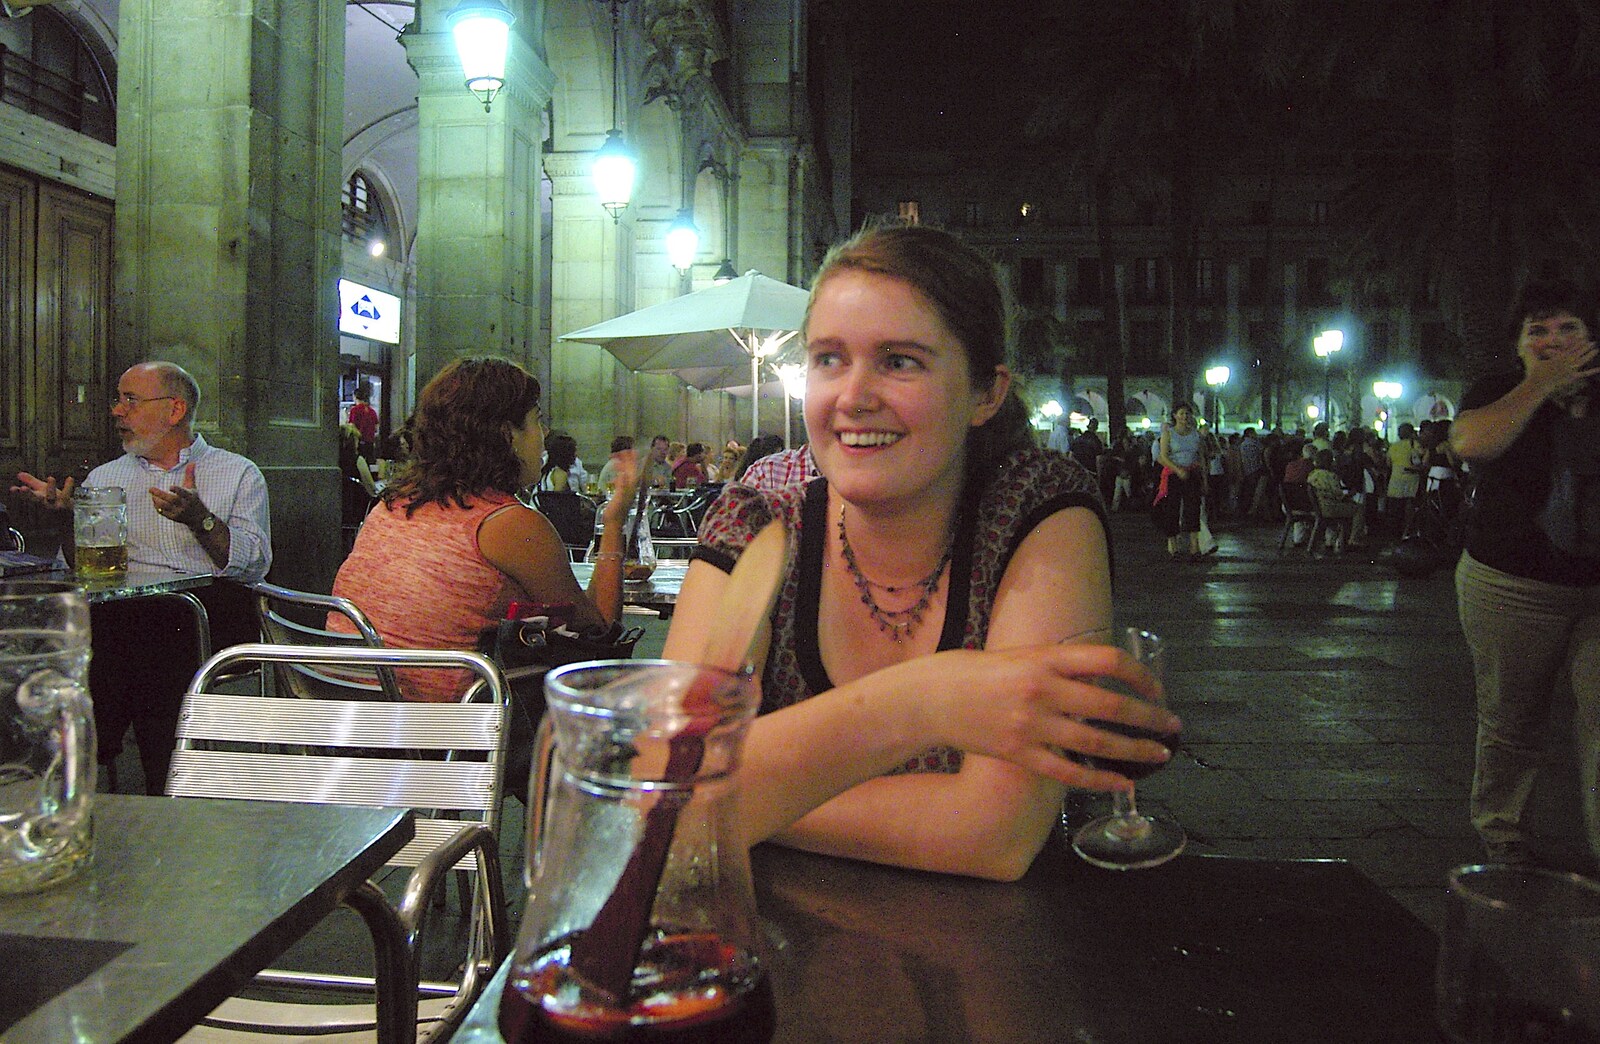 Isobel chats to some random chatty dude from Two Days in Barcelona, Catalunya, Spain - 22nd September 2006